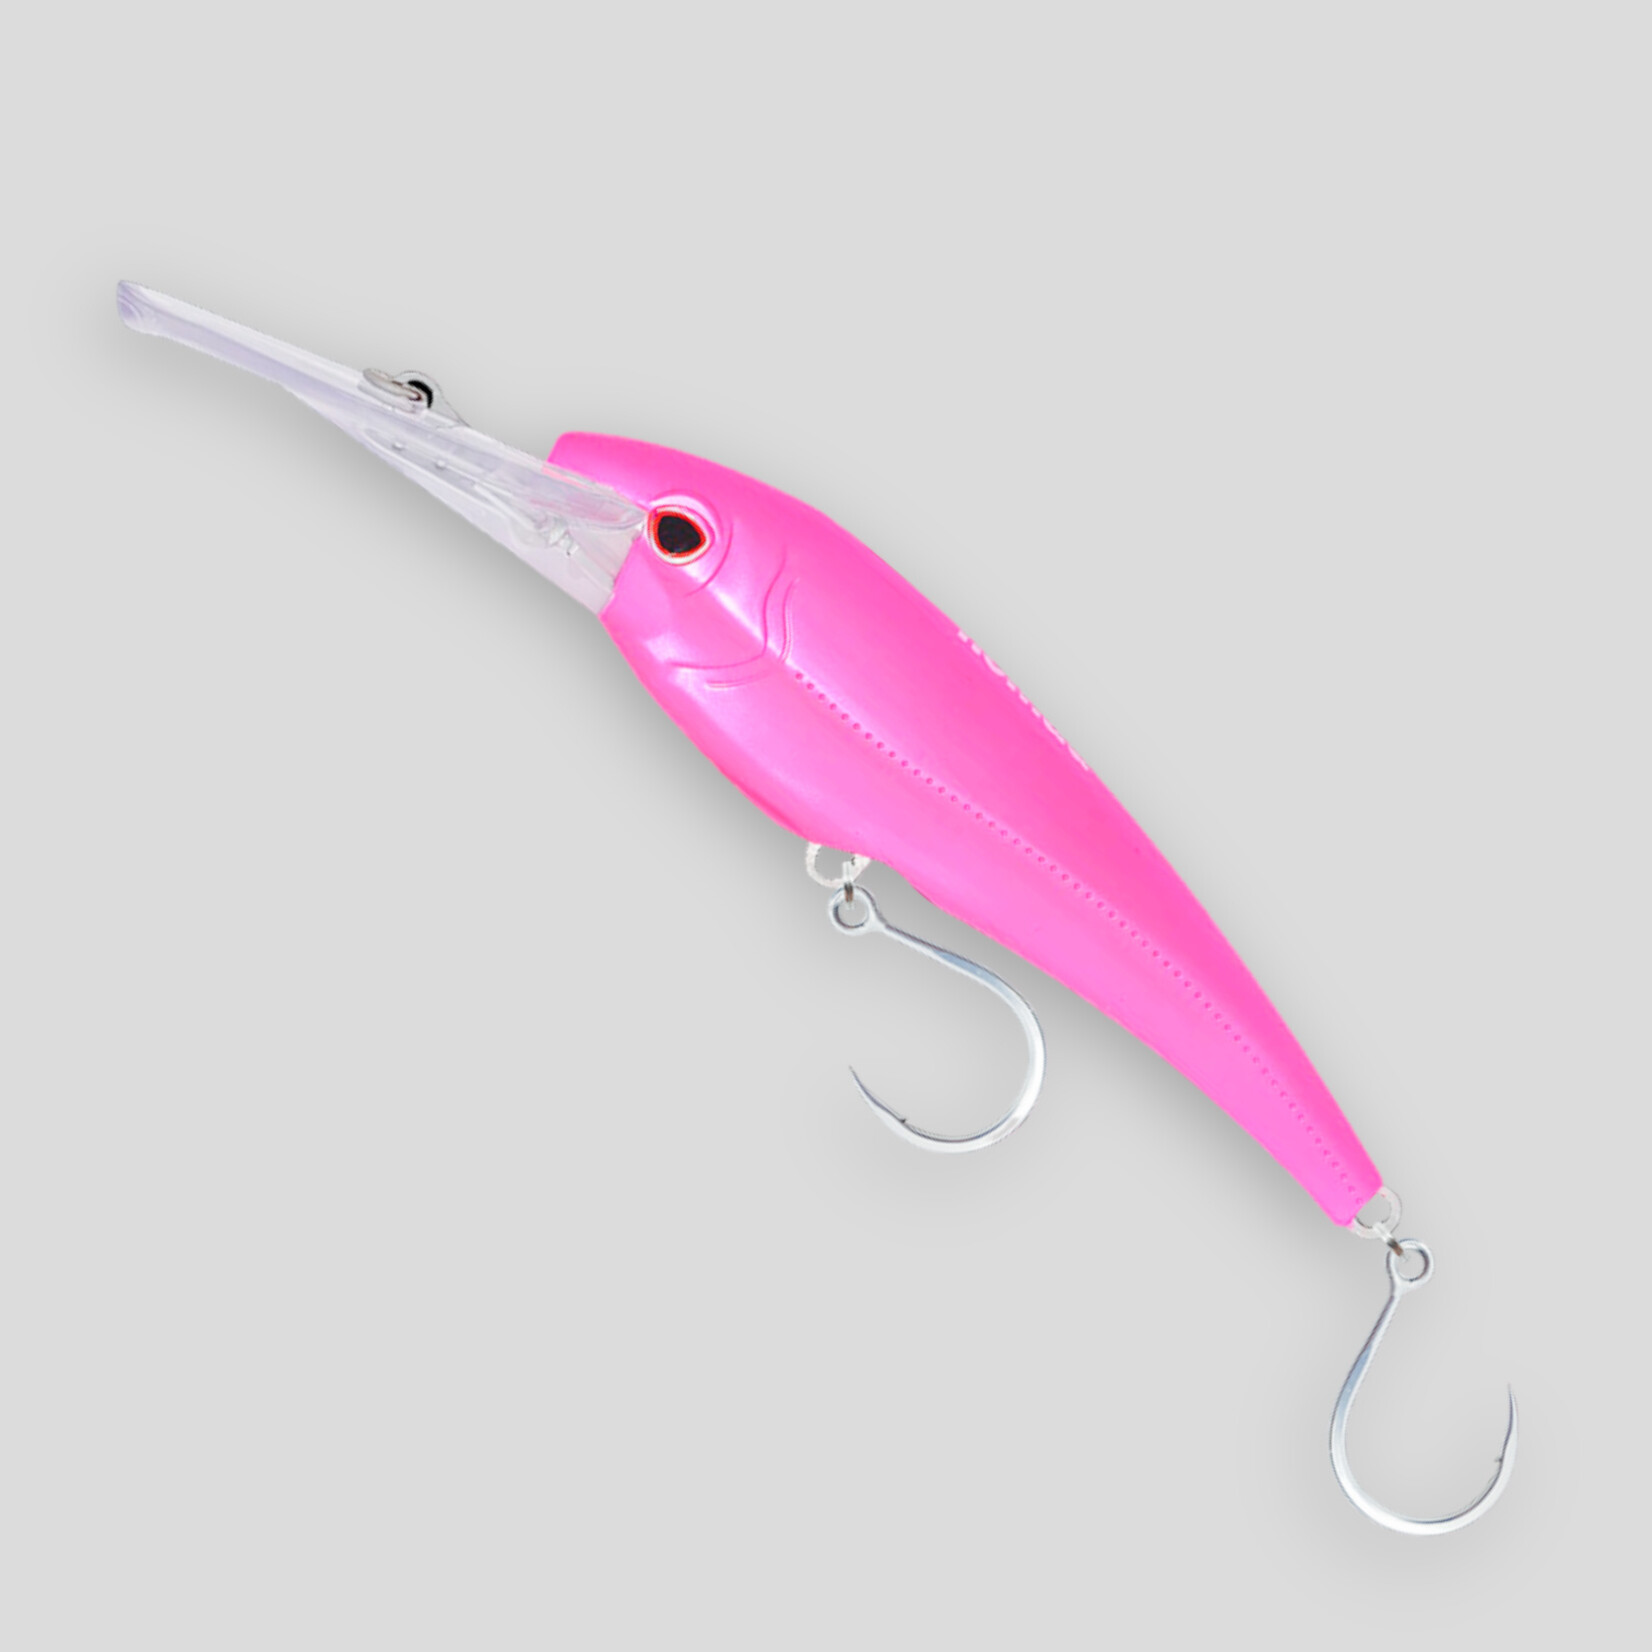 Nomad Nomad DTX Minnow Shallow